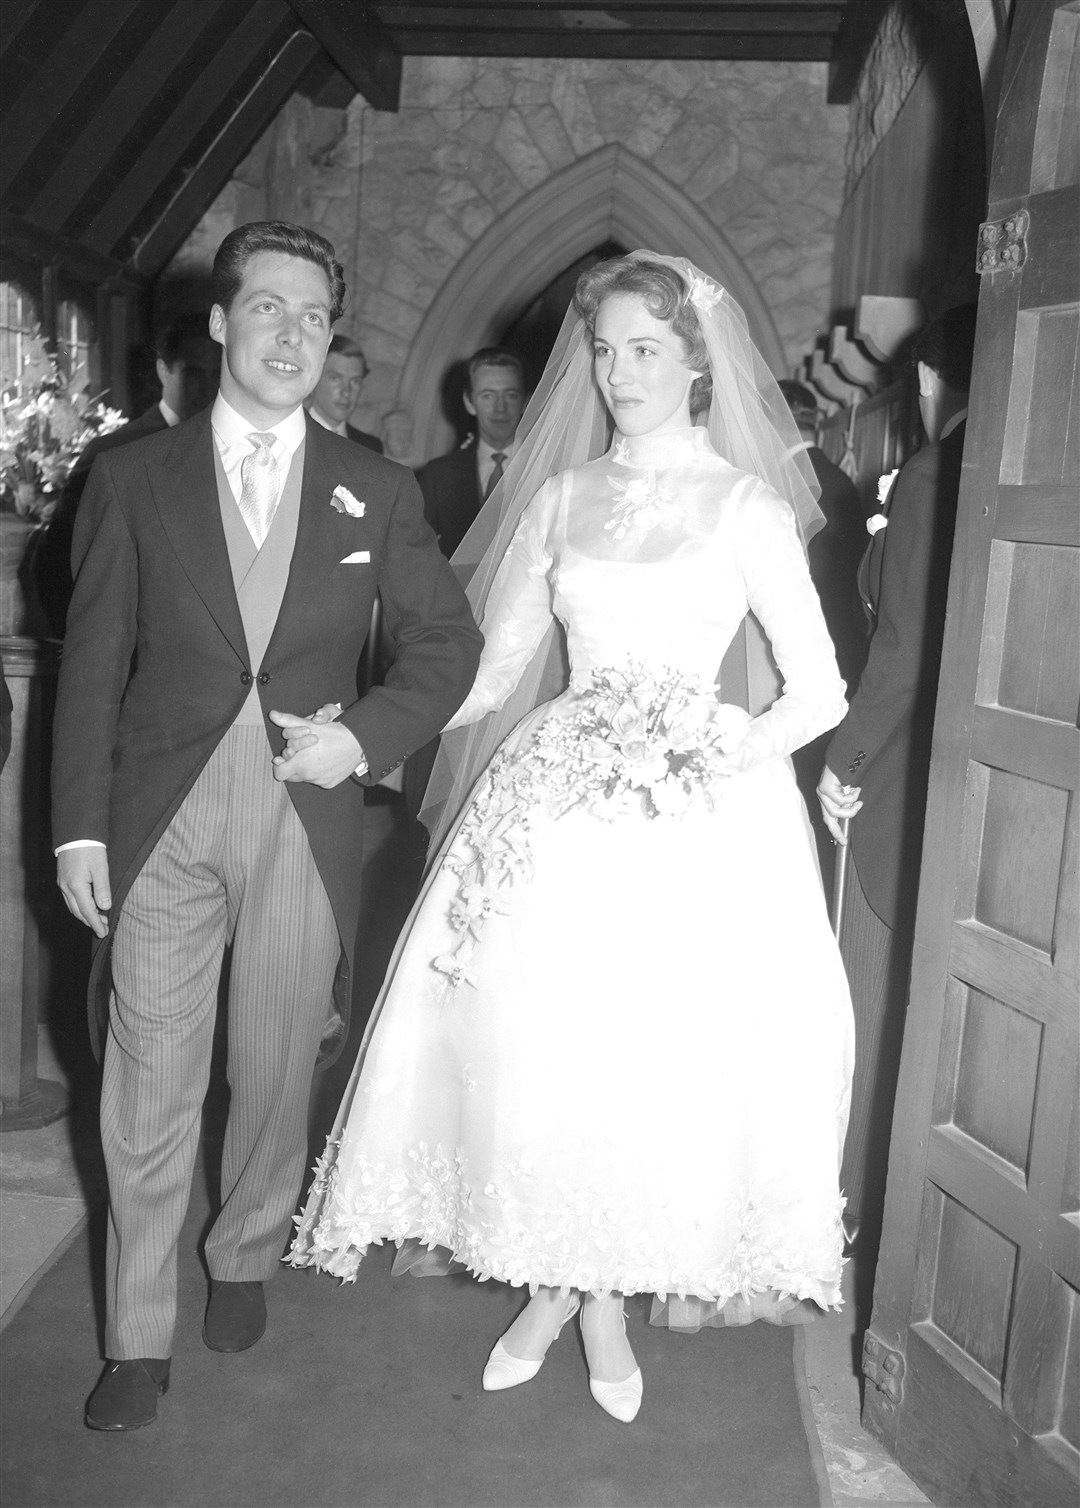 Walton and Julie Andrews, who were childhood sweethearts, married in 1959 but remained friends following their divorce in 1968 (PA Archive)